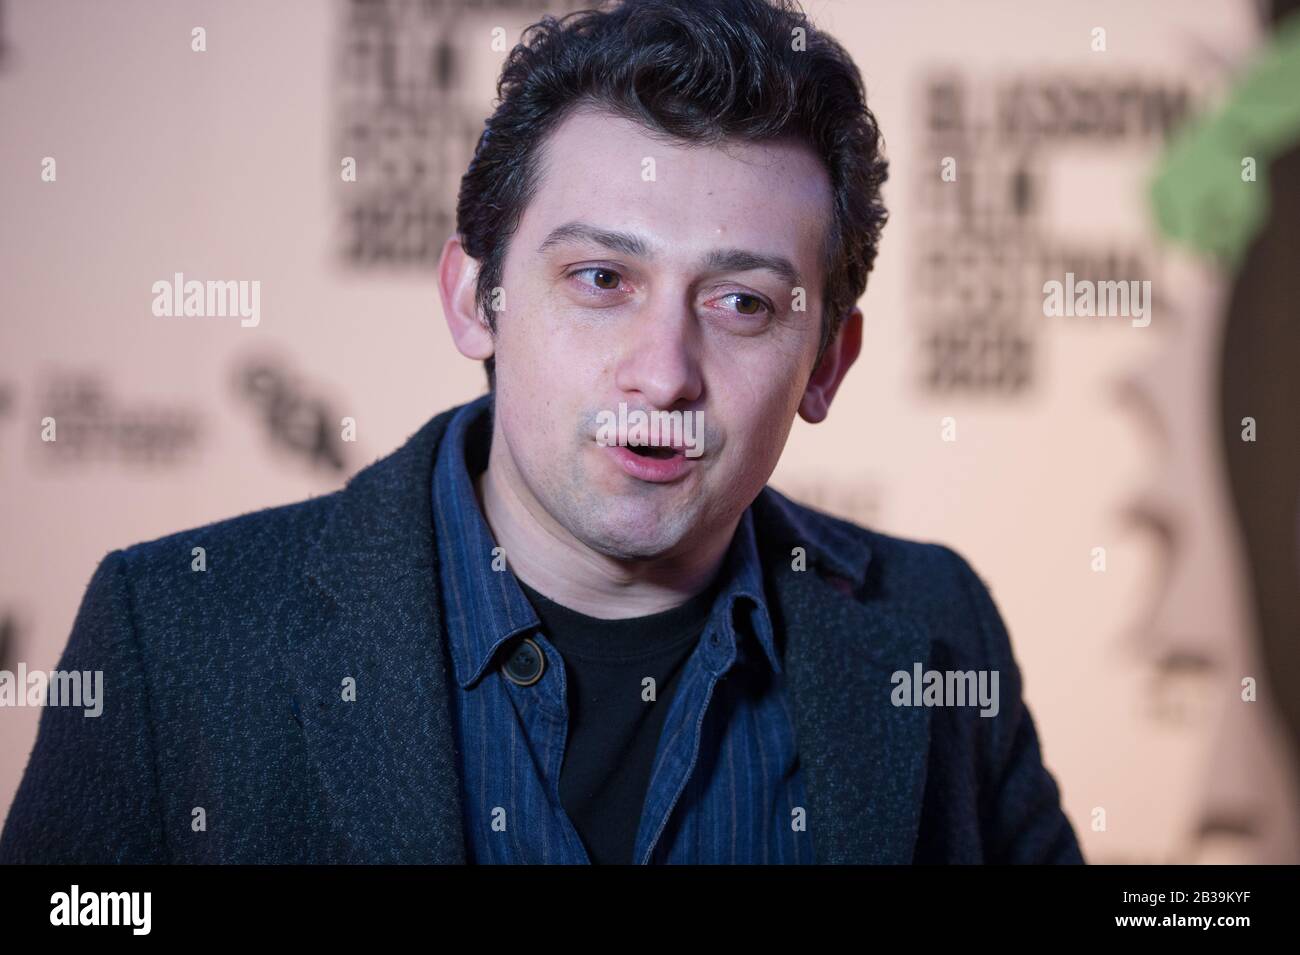 Glasgow, UK. 4th Mar, 2020. Pictured: Craig Roberts - Actor. Scottish Premiere of the film, Eternal Beauty, on the red carpet of the Glasgow Film Theatre at the Glasgow Film Festival 2020. Credit: Colin Fisher/Alamy Live News Stock Photo